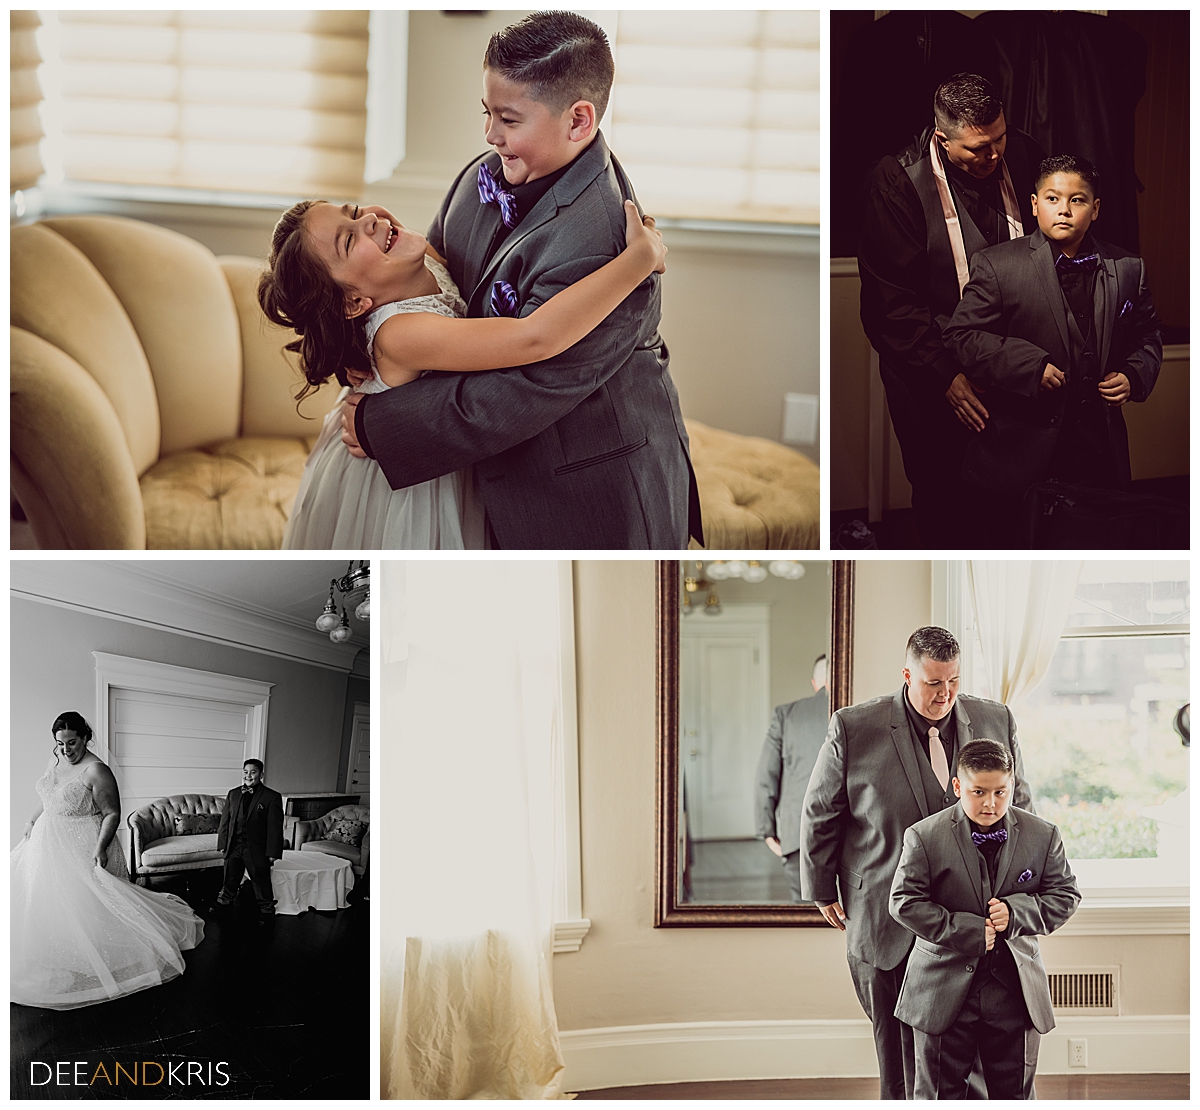 Four images of couple's son with couple and flower girl.